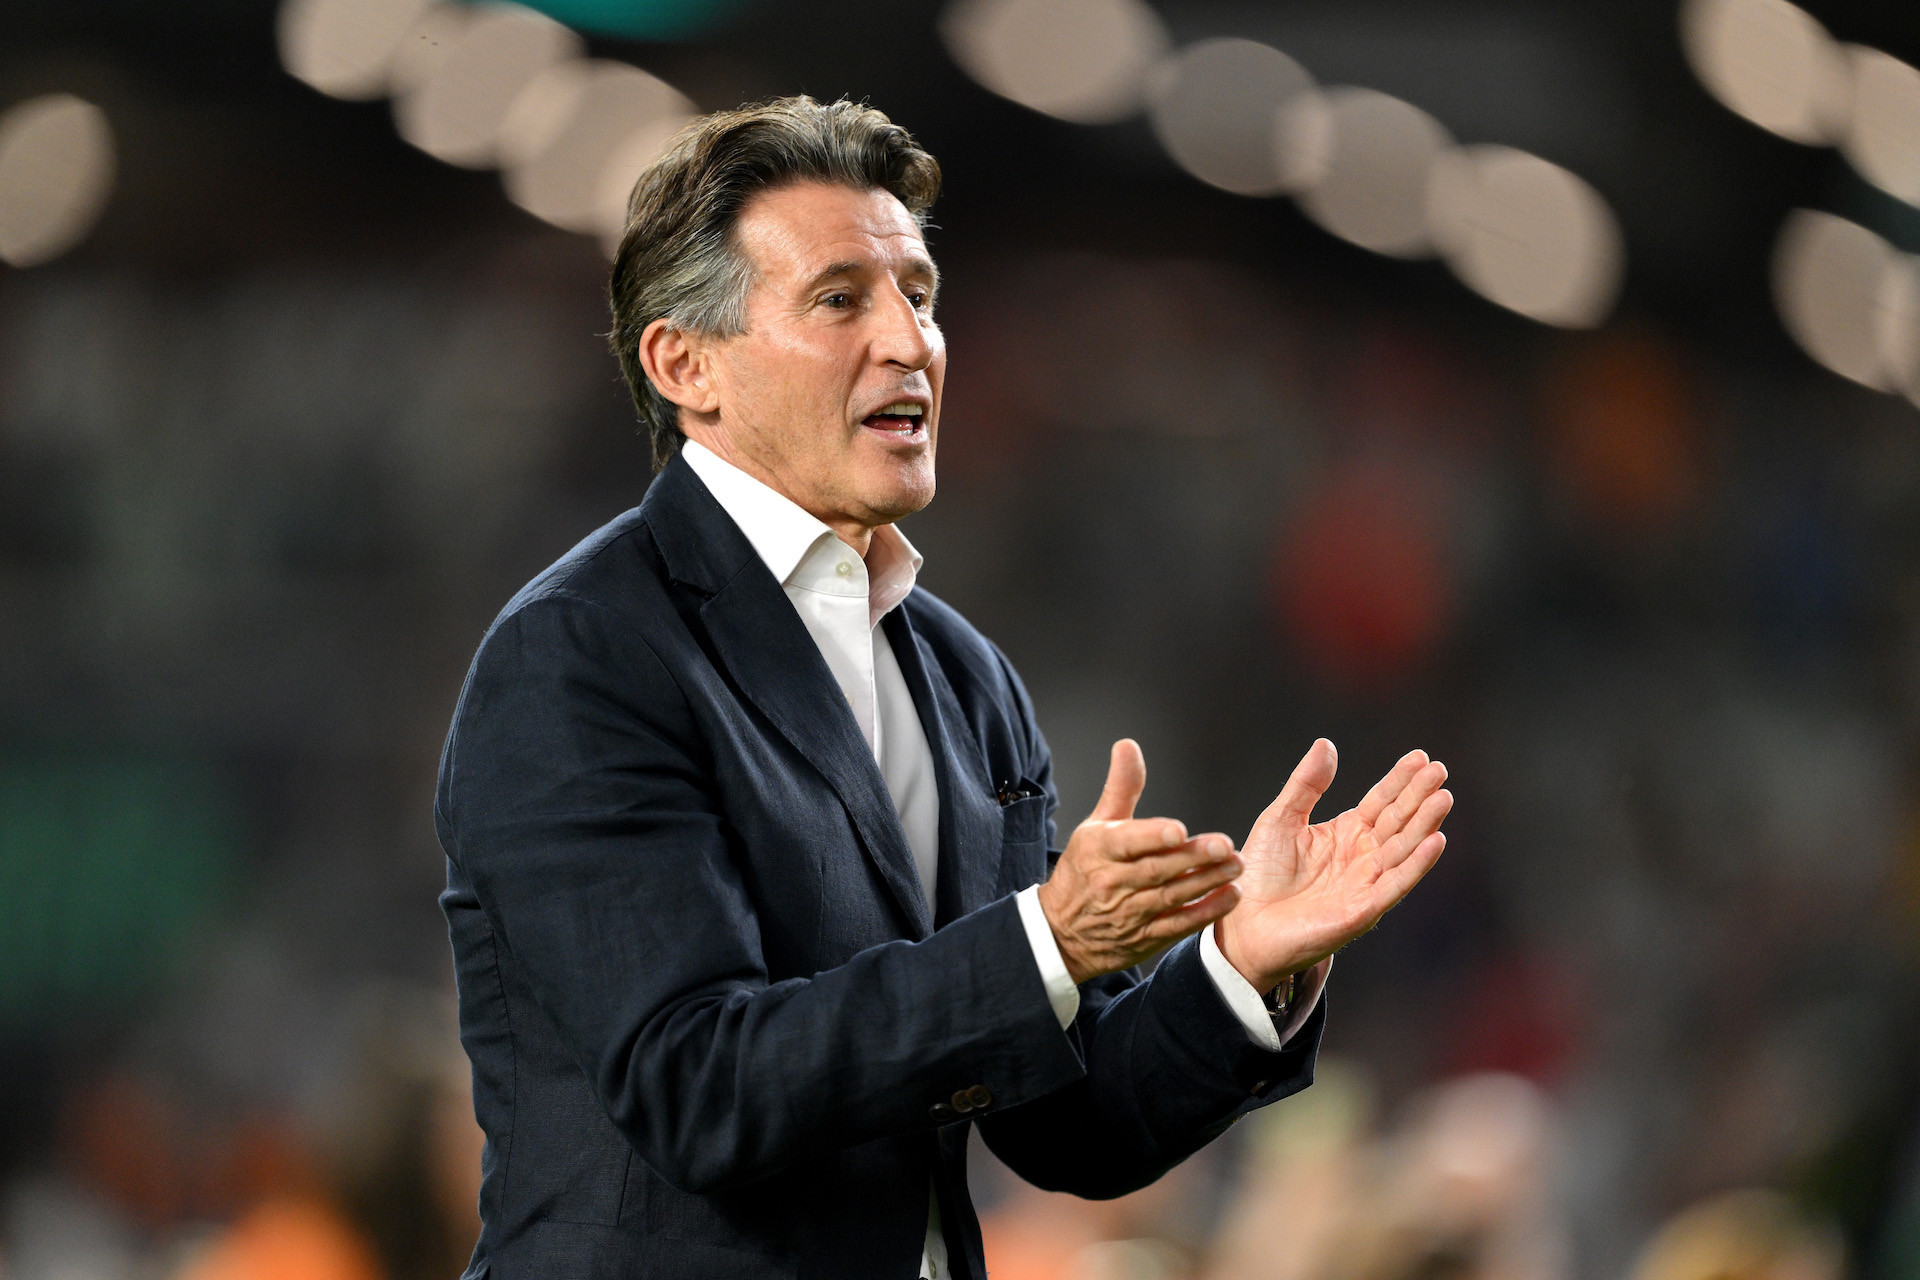 Seb Coe says Netflix series will showcase unique "global appeal" of athletics. GETTY IMAGES